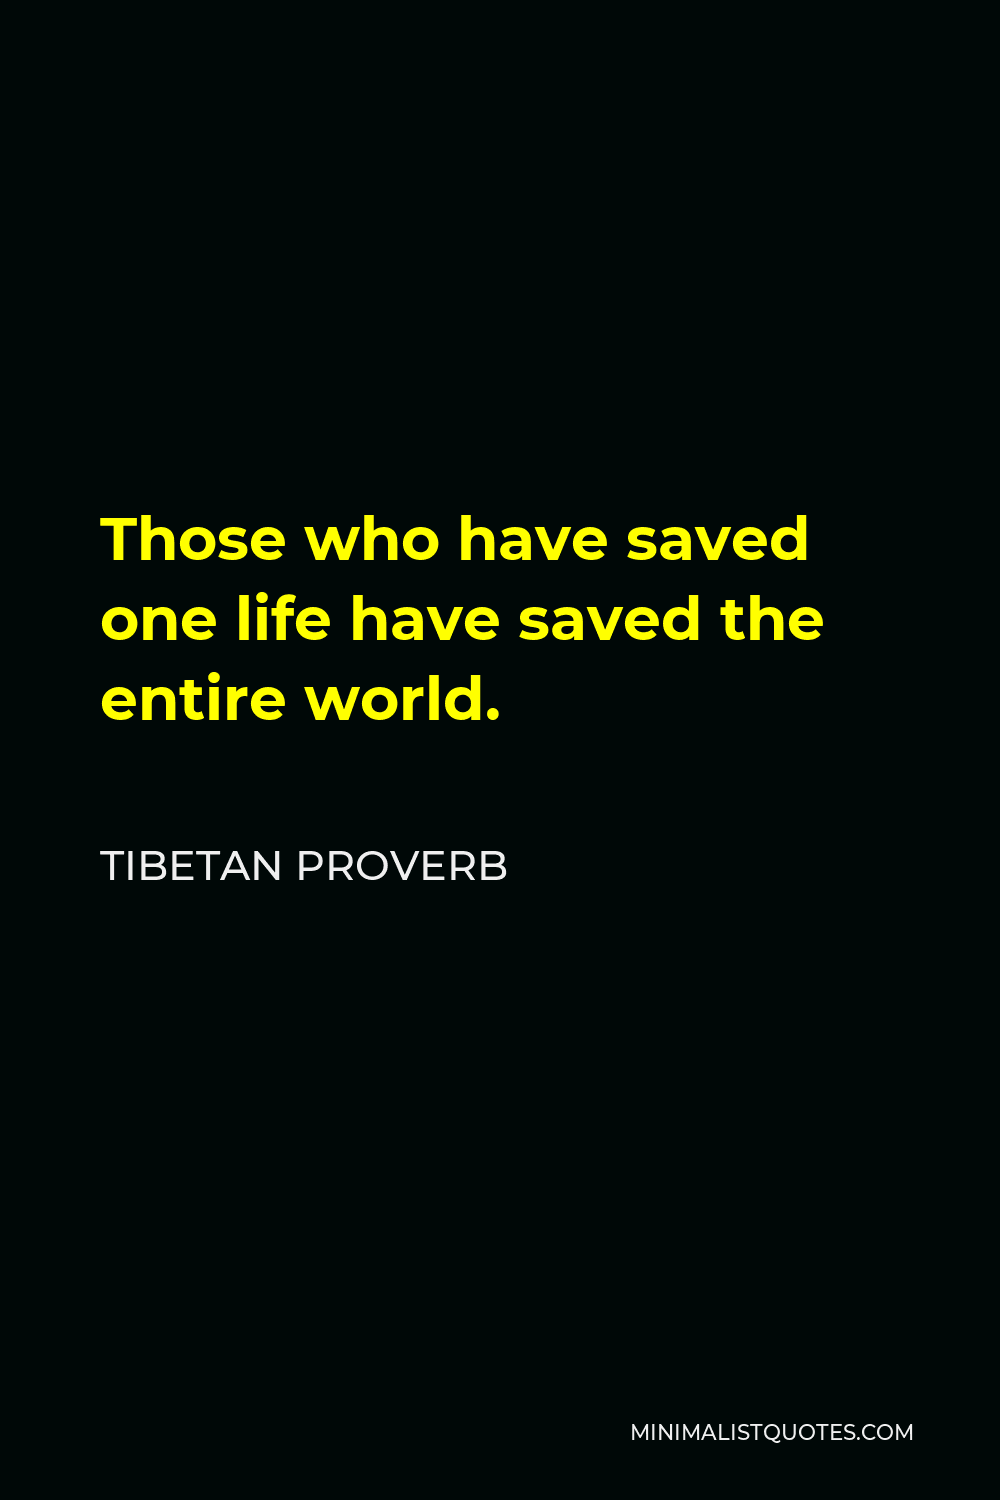 Tibetan Proverb Quote - Those who have saved one life have saved the entire world.